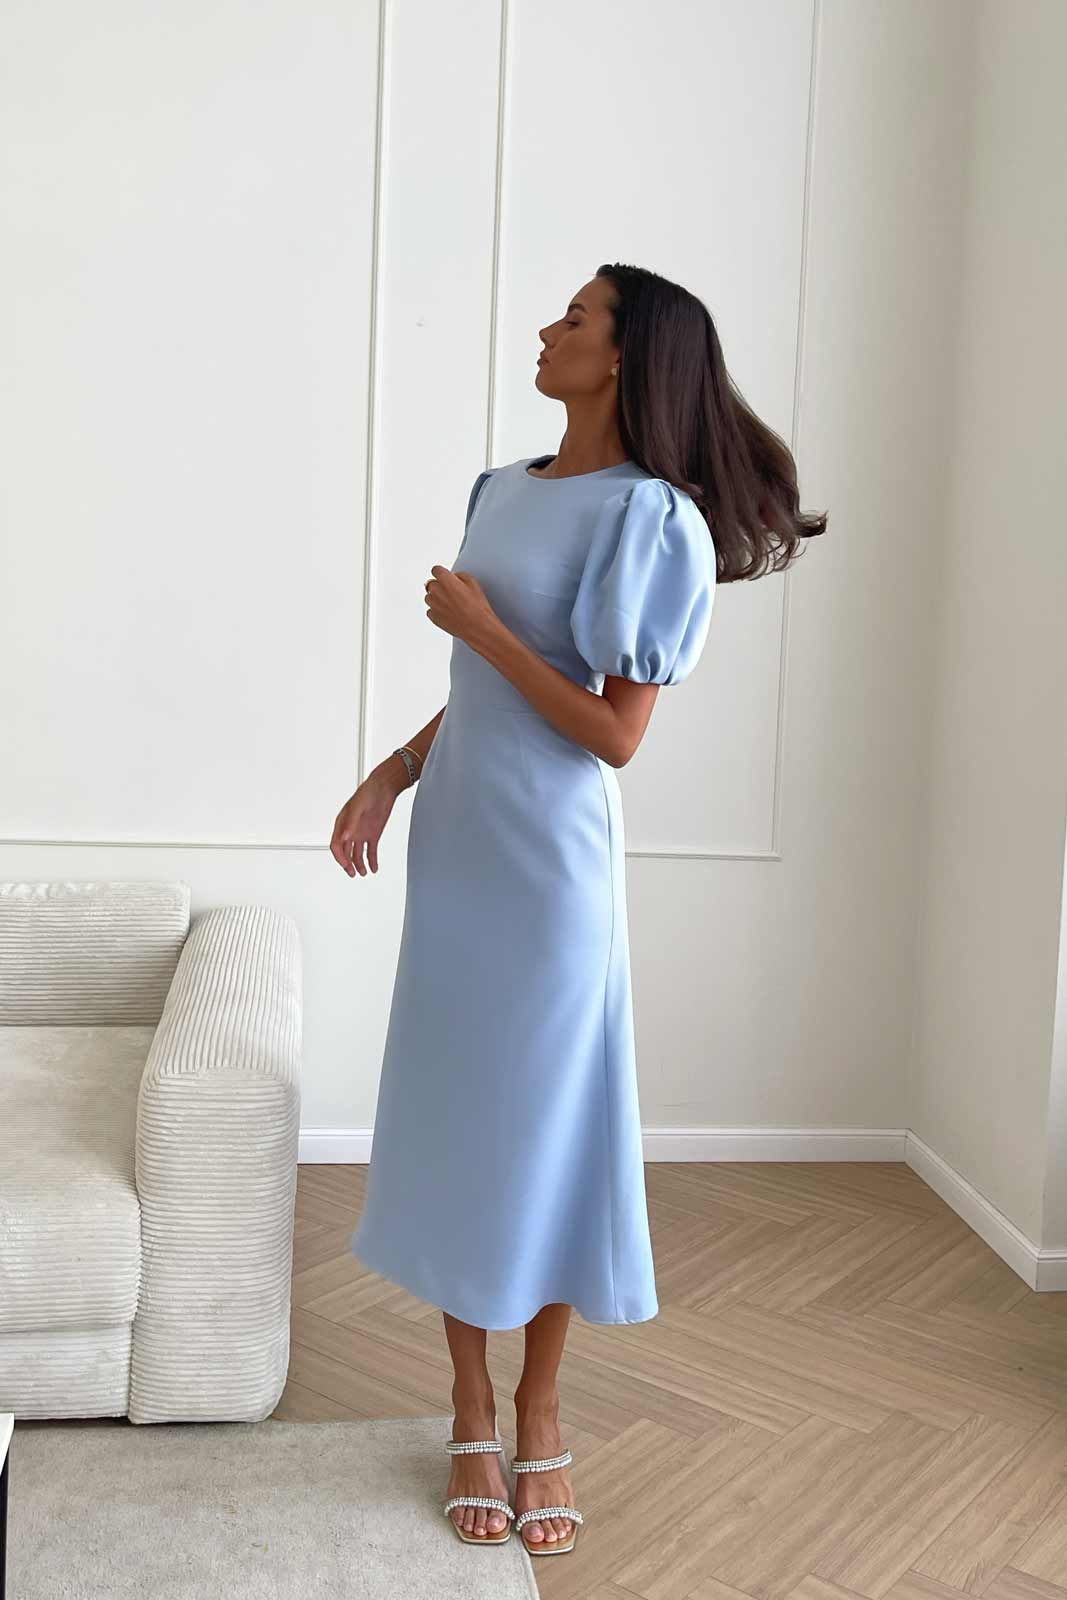 How to Style Blue Midi Dress: Best 15 Beautiful and Deep Outfit Ideas for Women